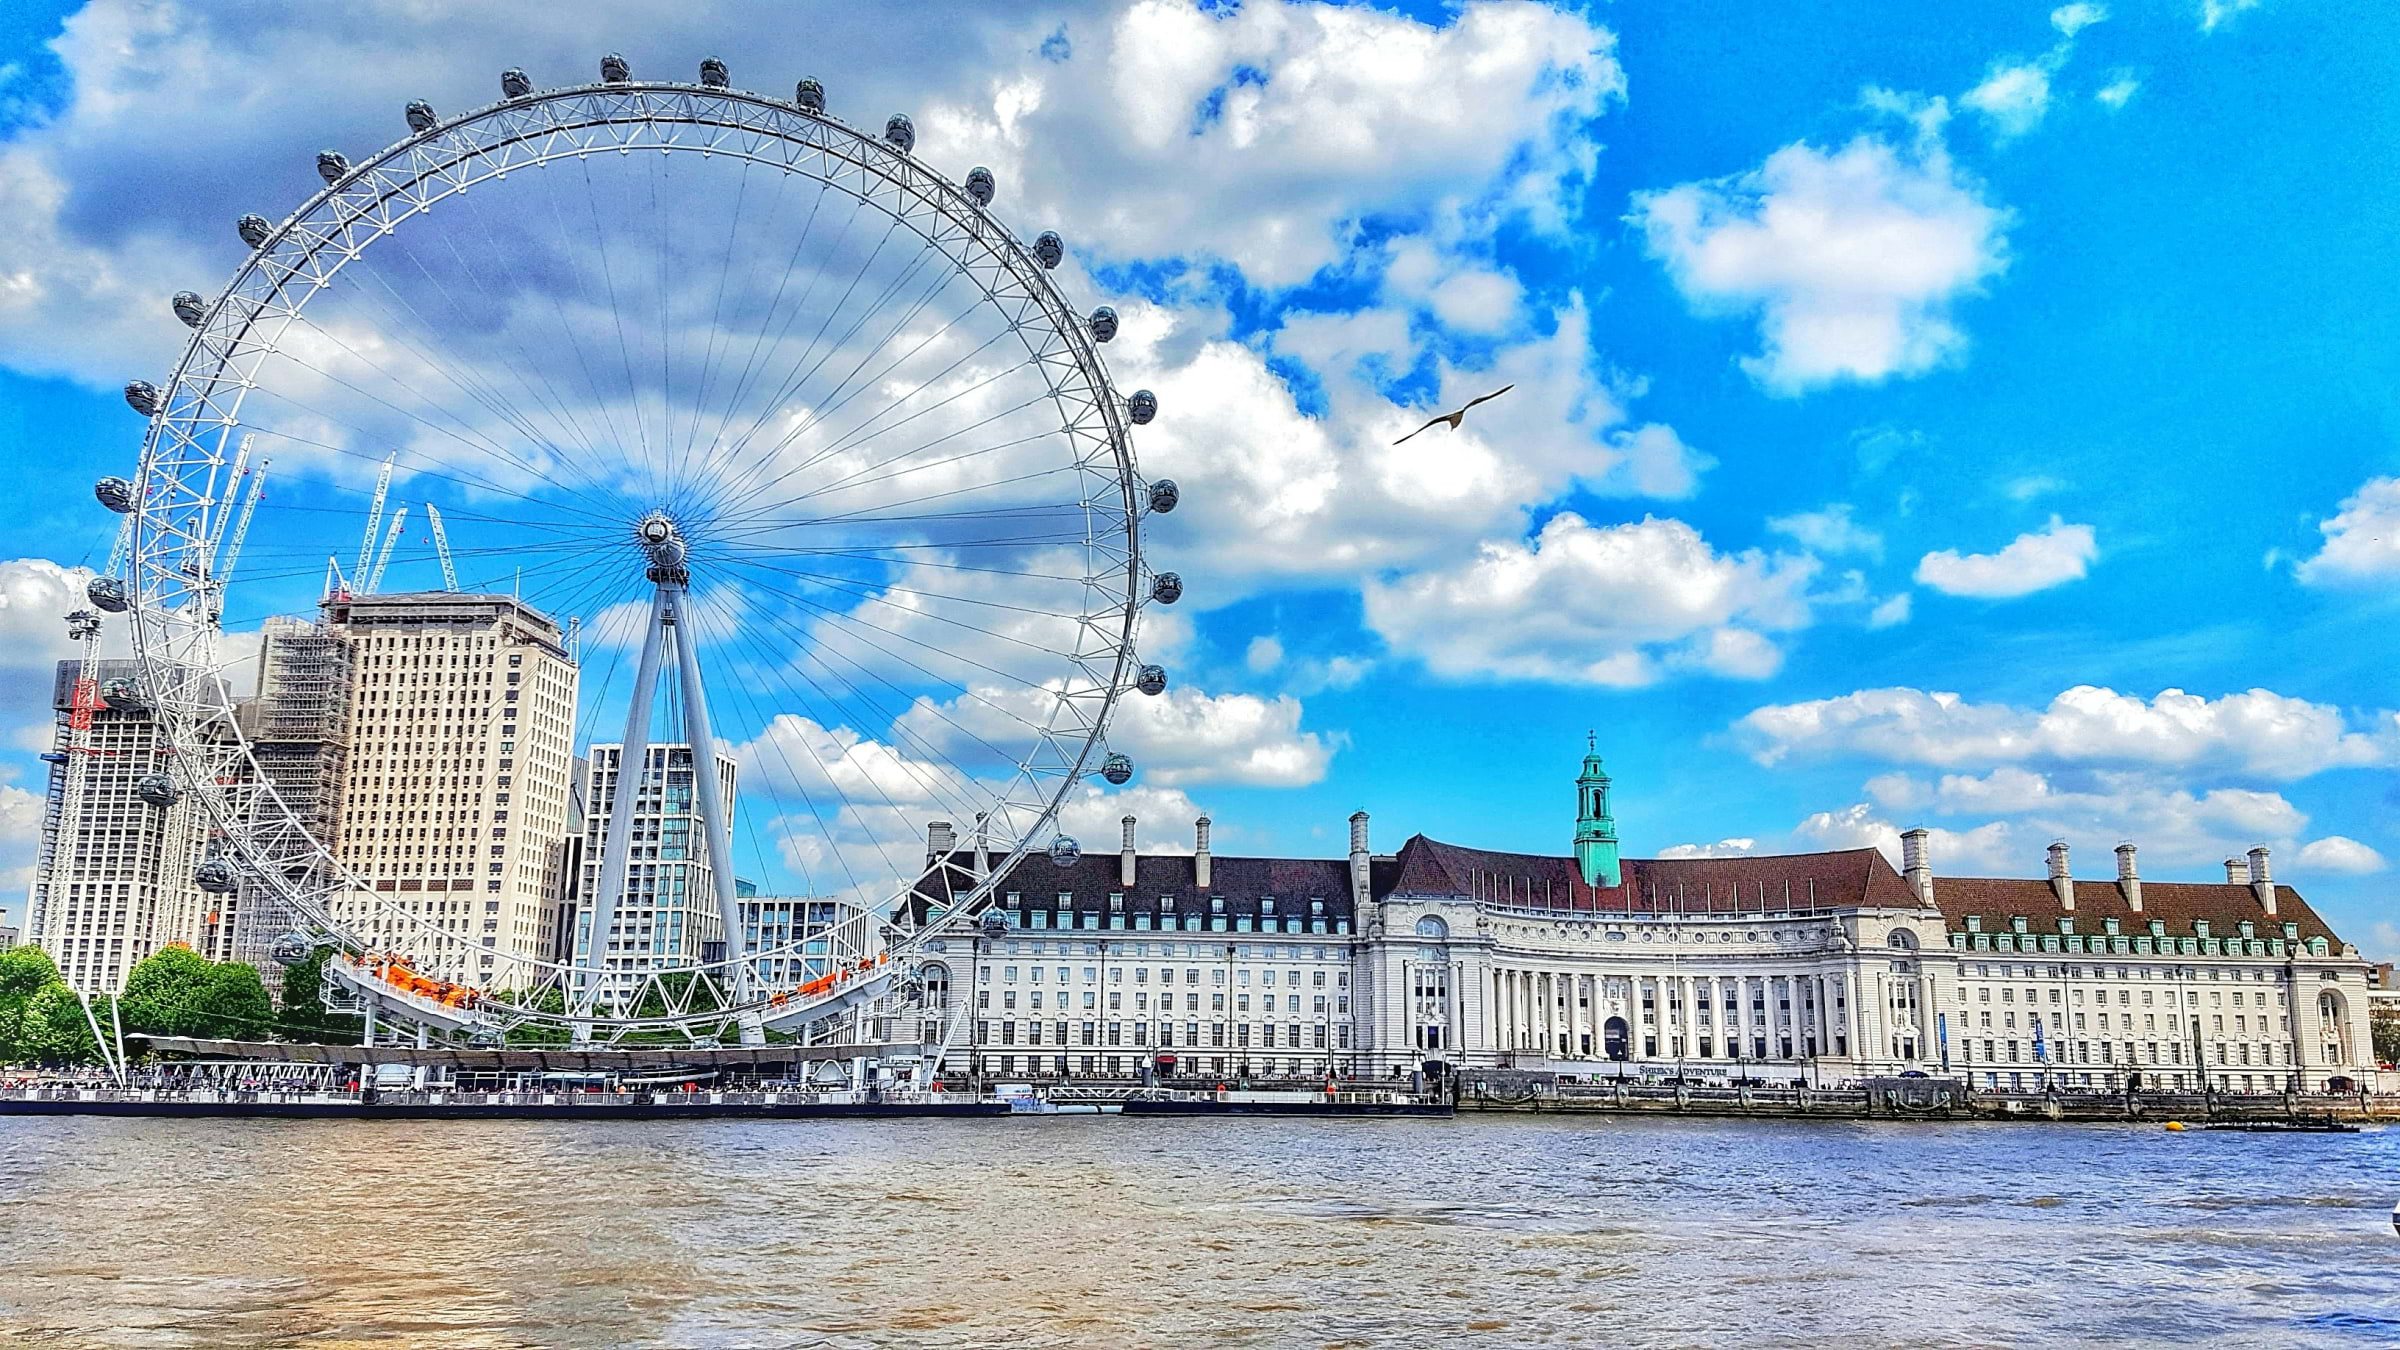 Ride the London Eye for free if you were born on 29th February